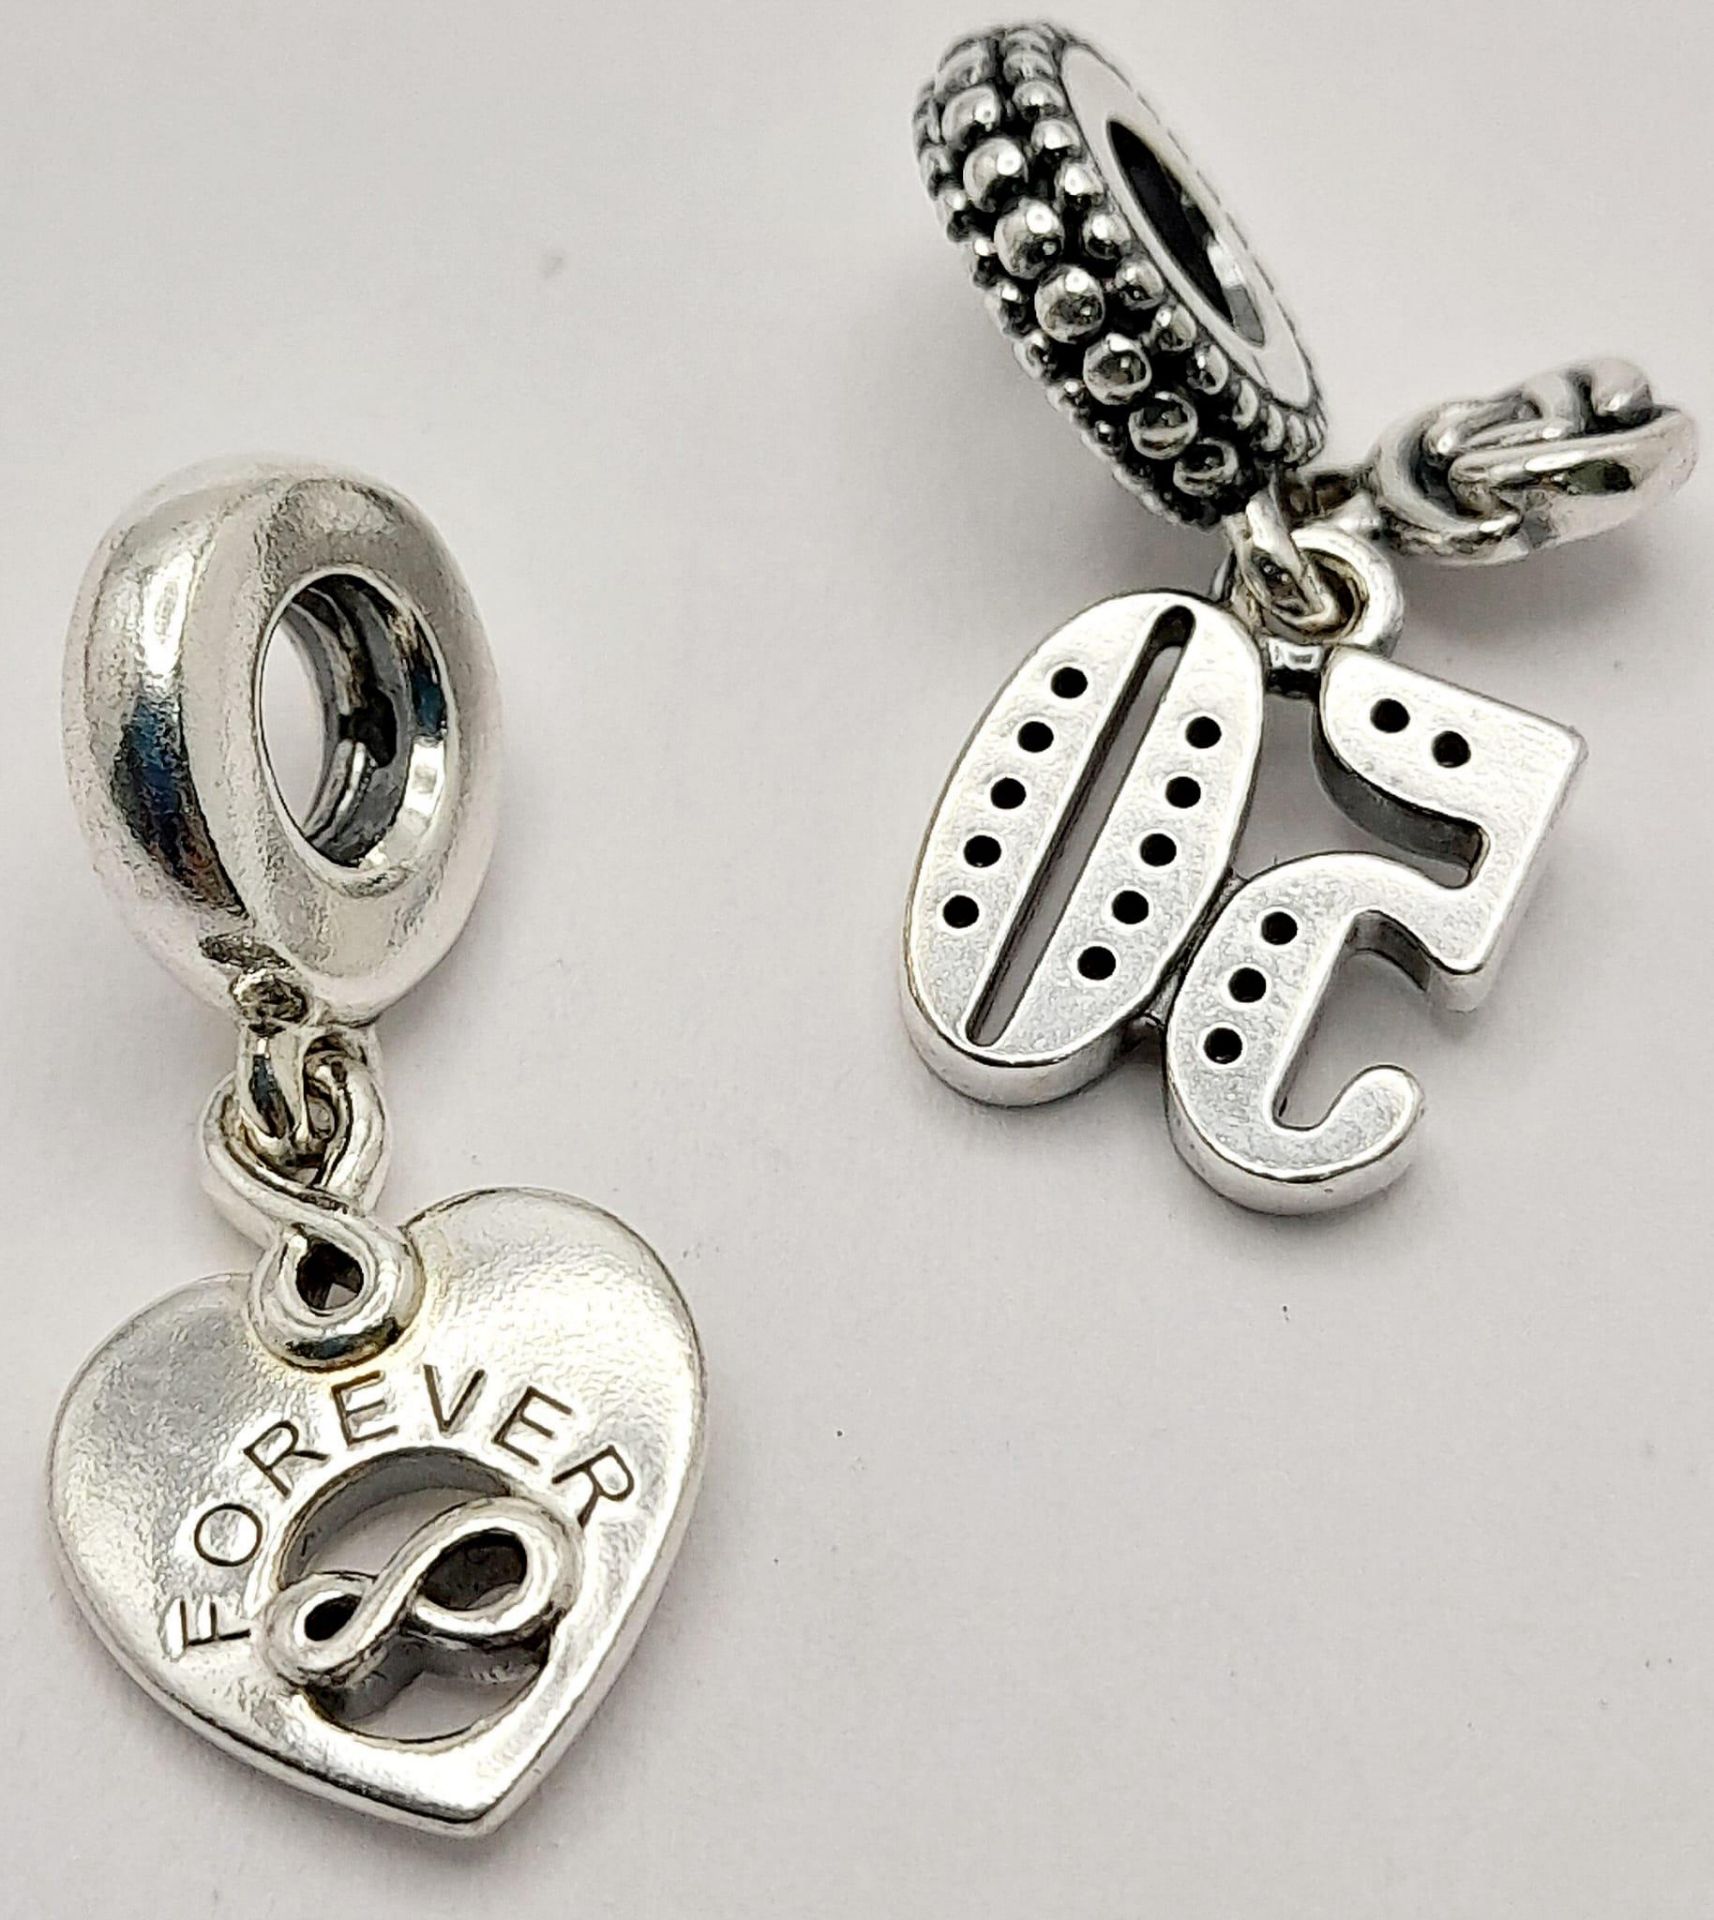 2X fancy Pandora 925 silver charms/pendants include a "Friend Forever" heart and a silver stone - Image 3 of 9